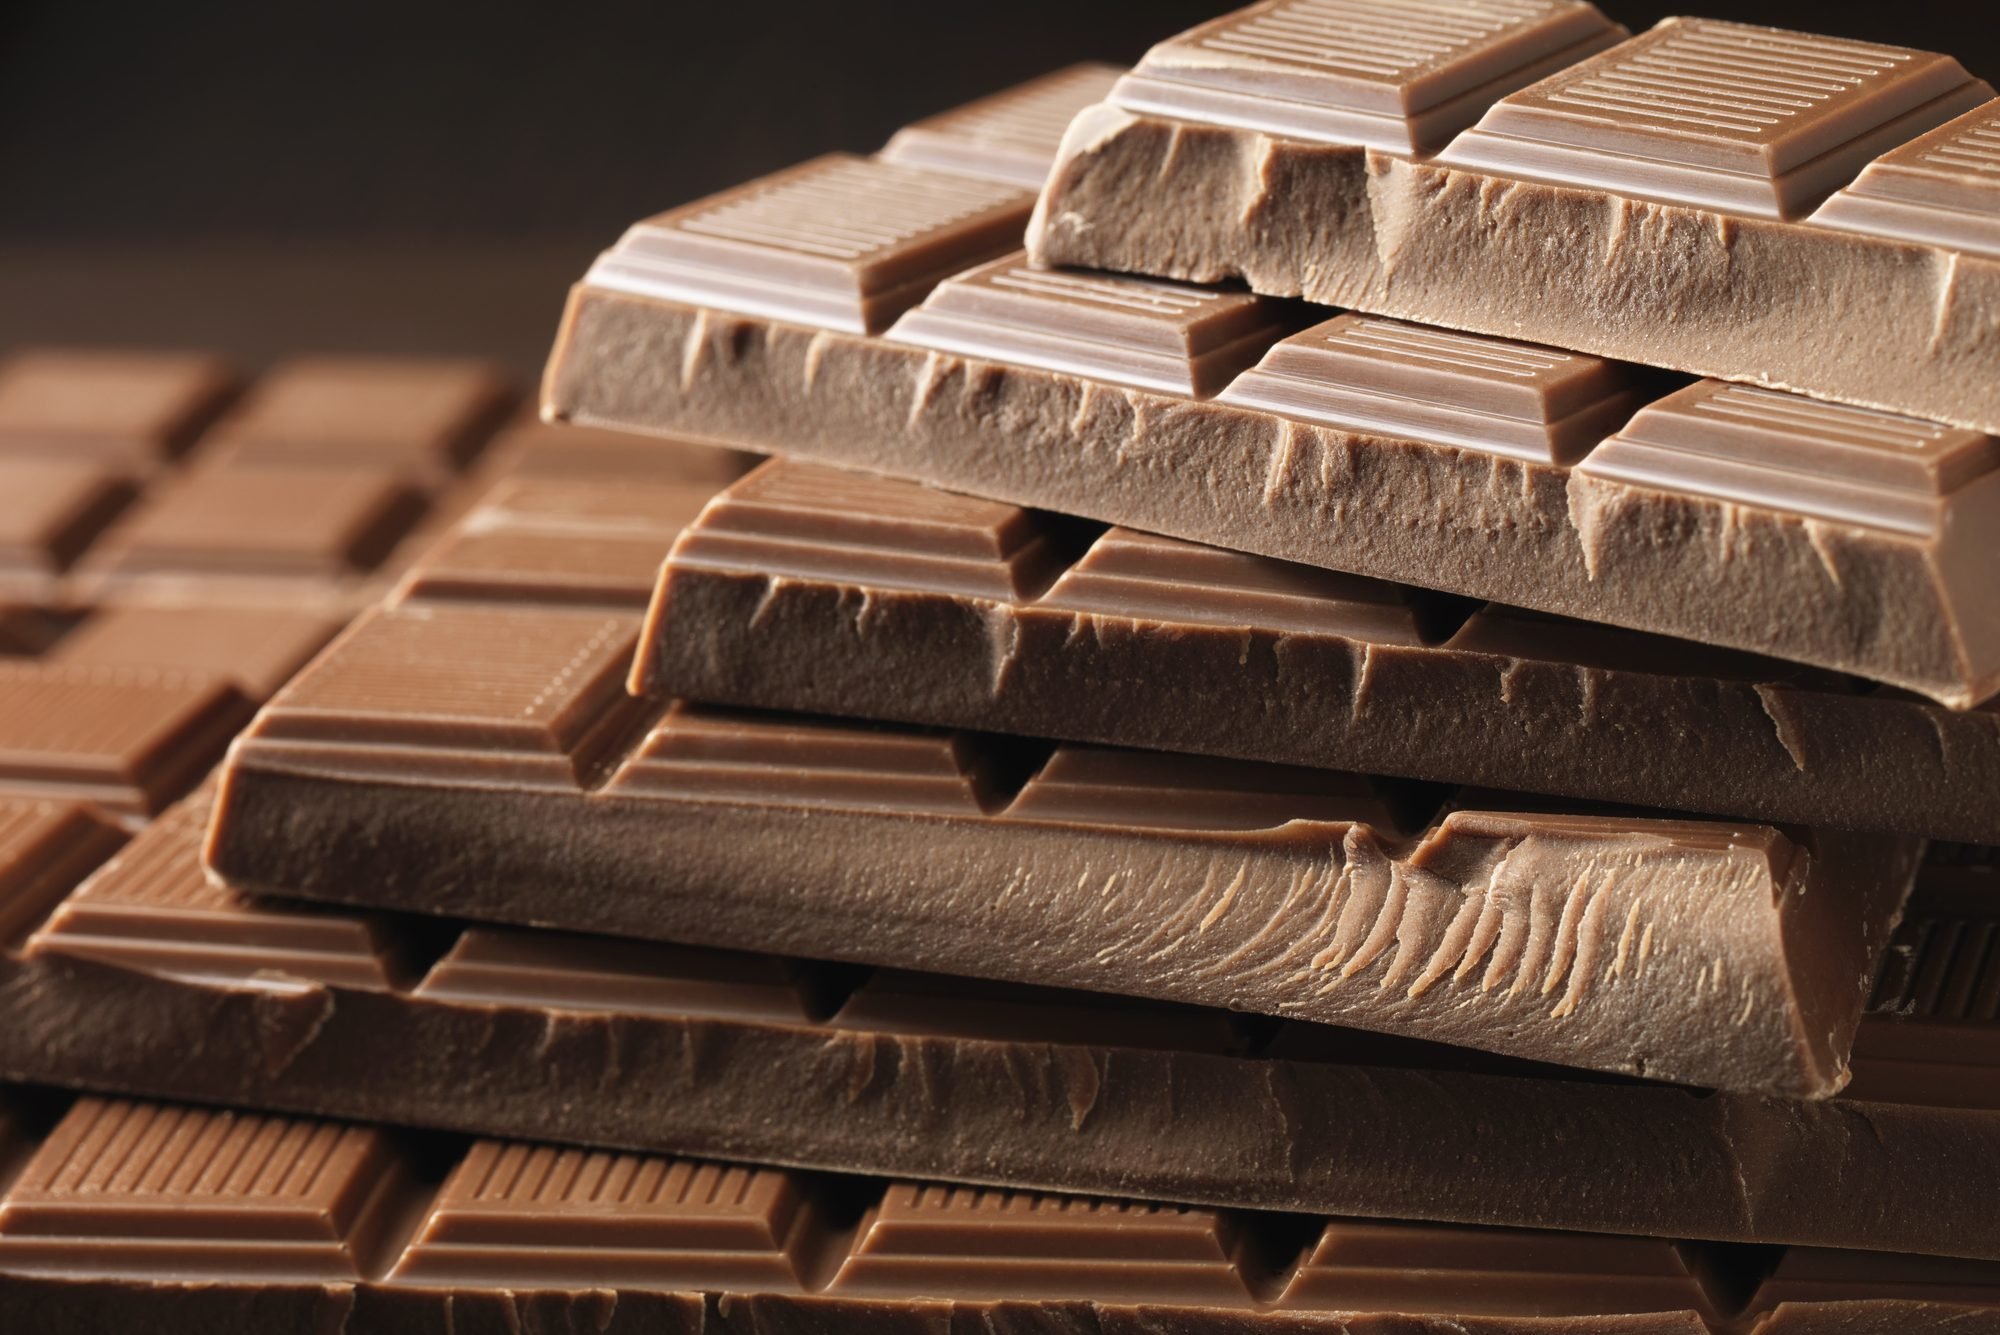 I Ate Chocolate Every Day for a Week—Here’s What Happened